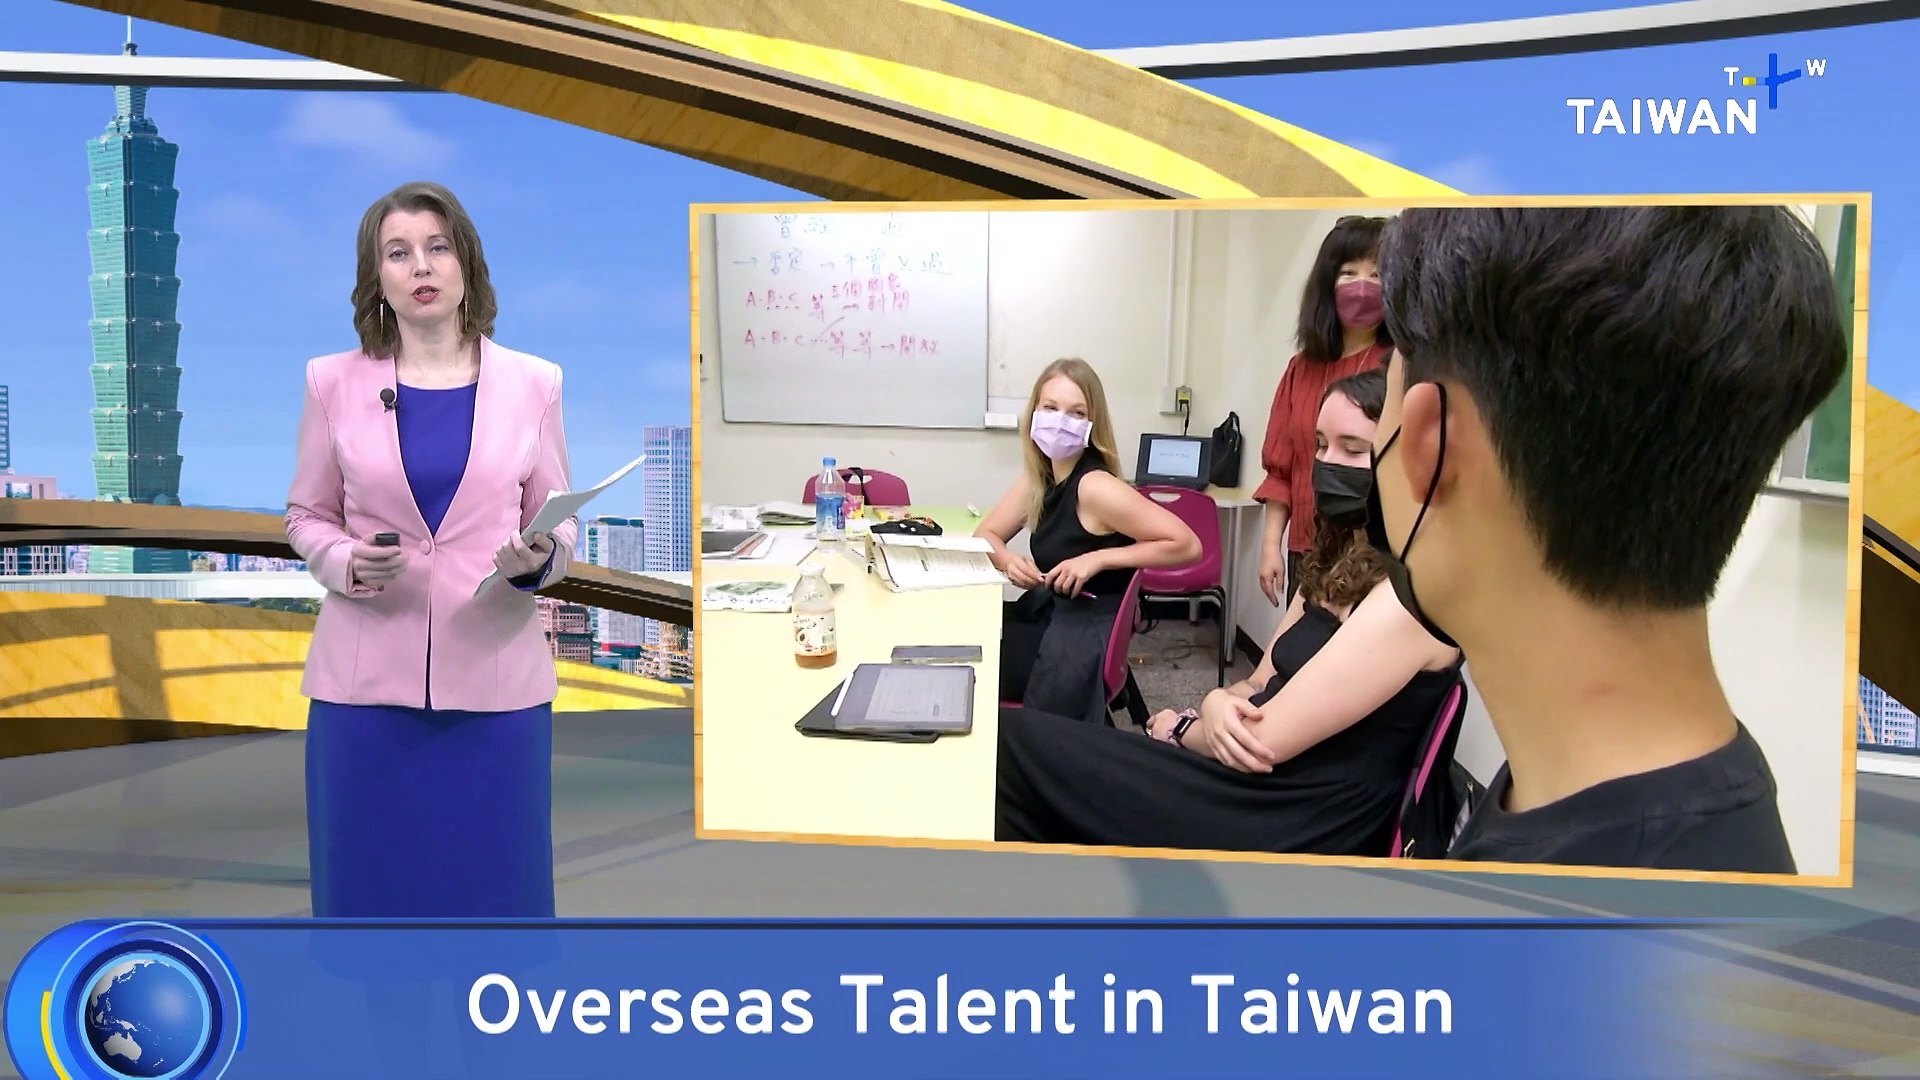 Taiwan Looking To Attract More Overseas Talent - video Dailymotion